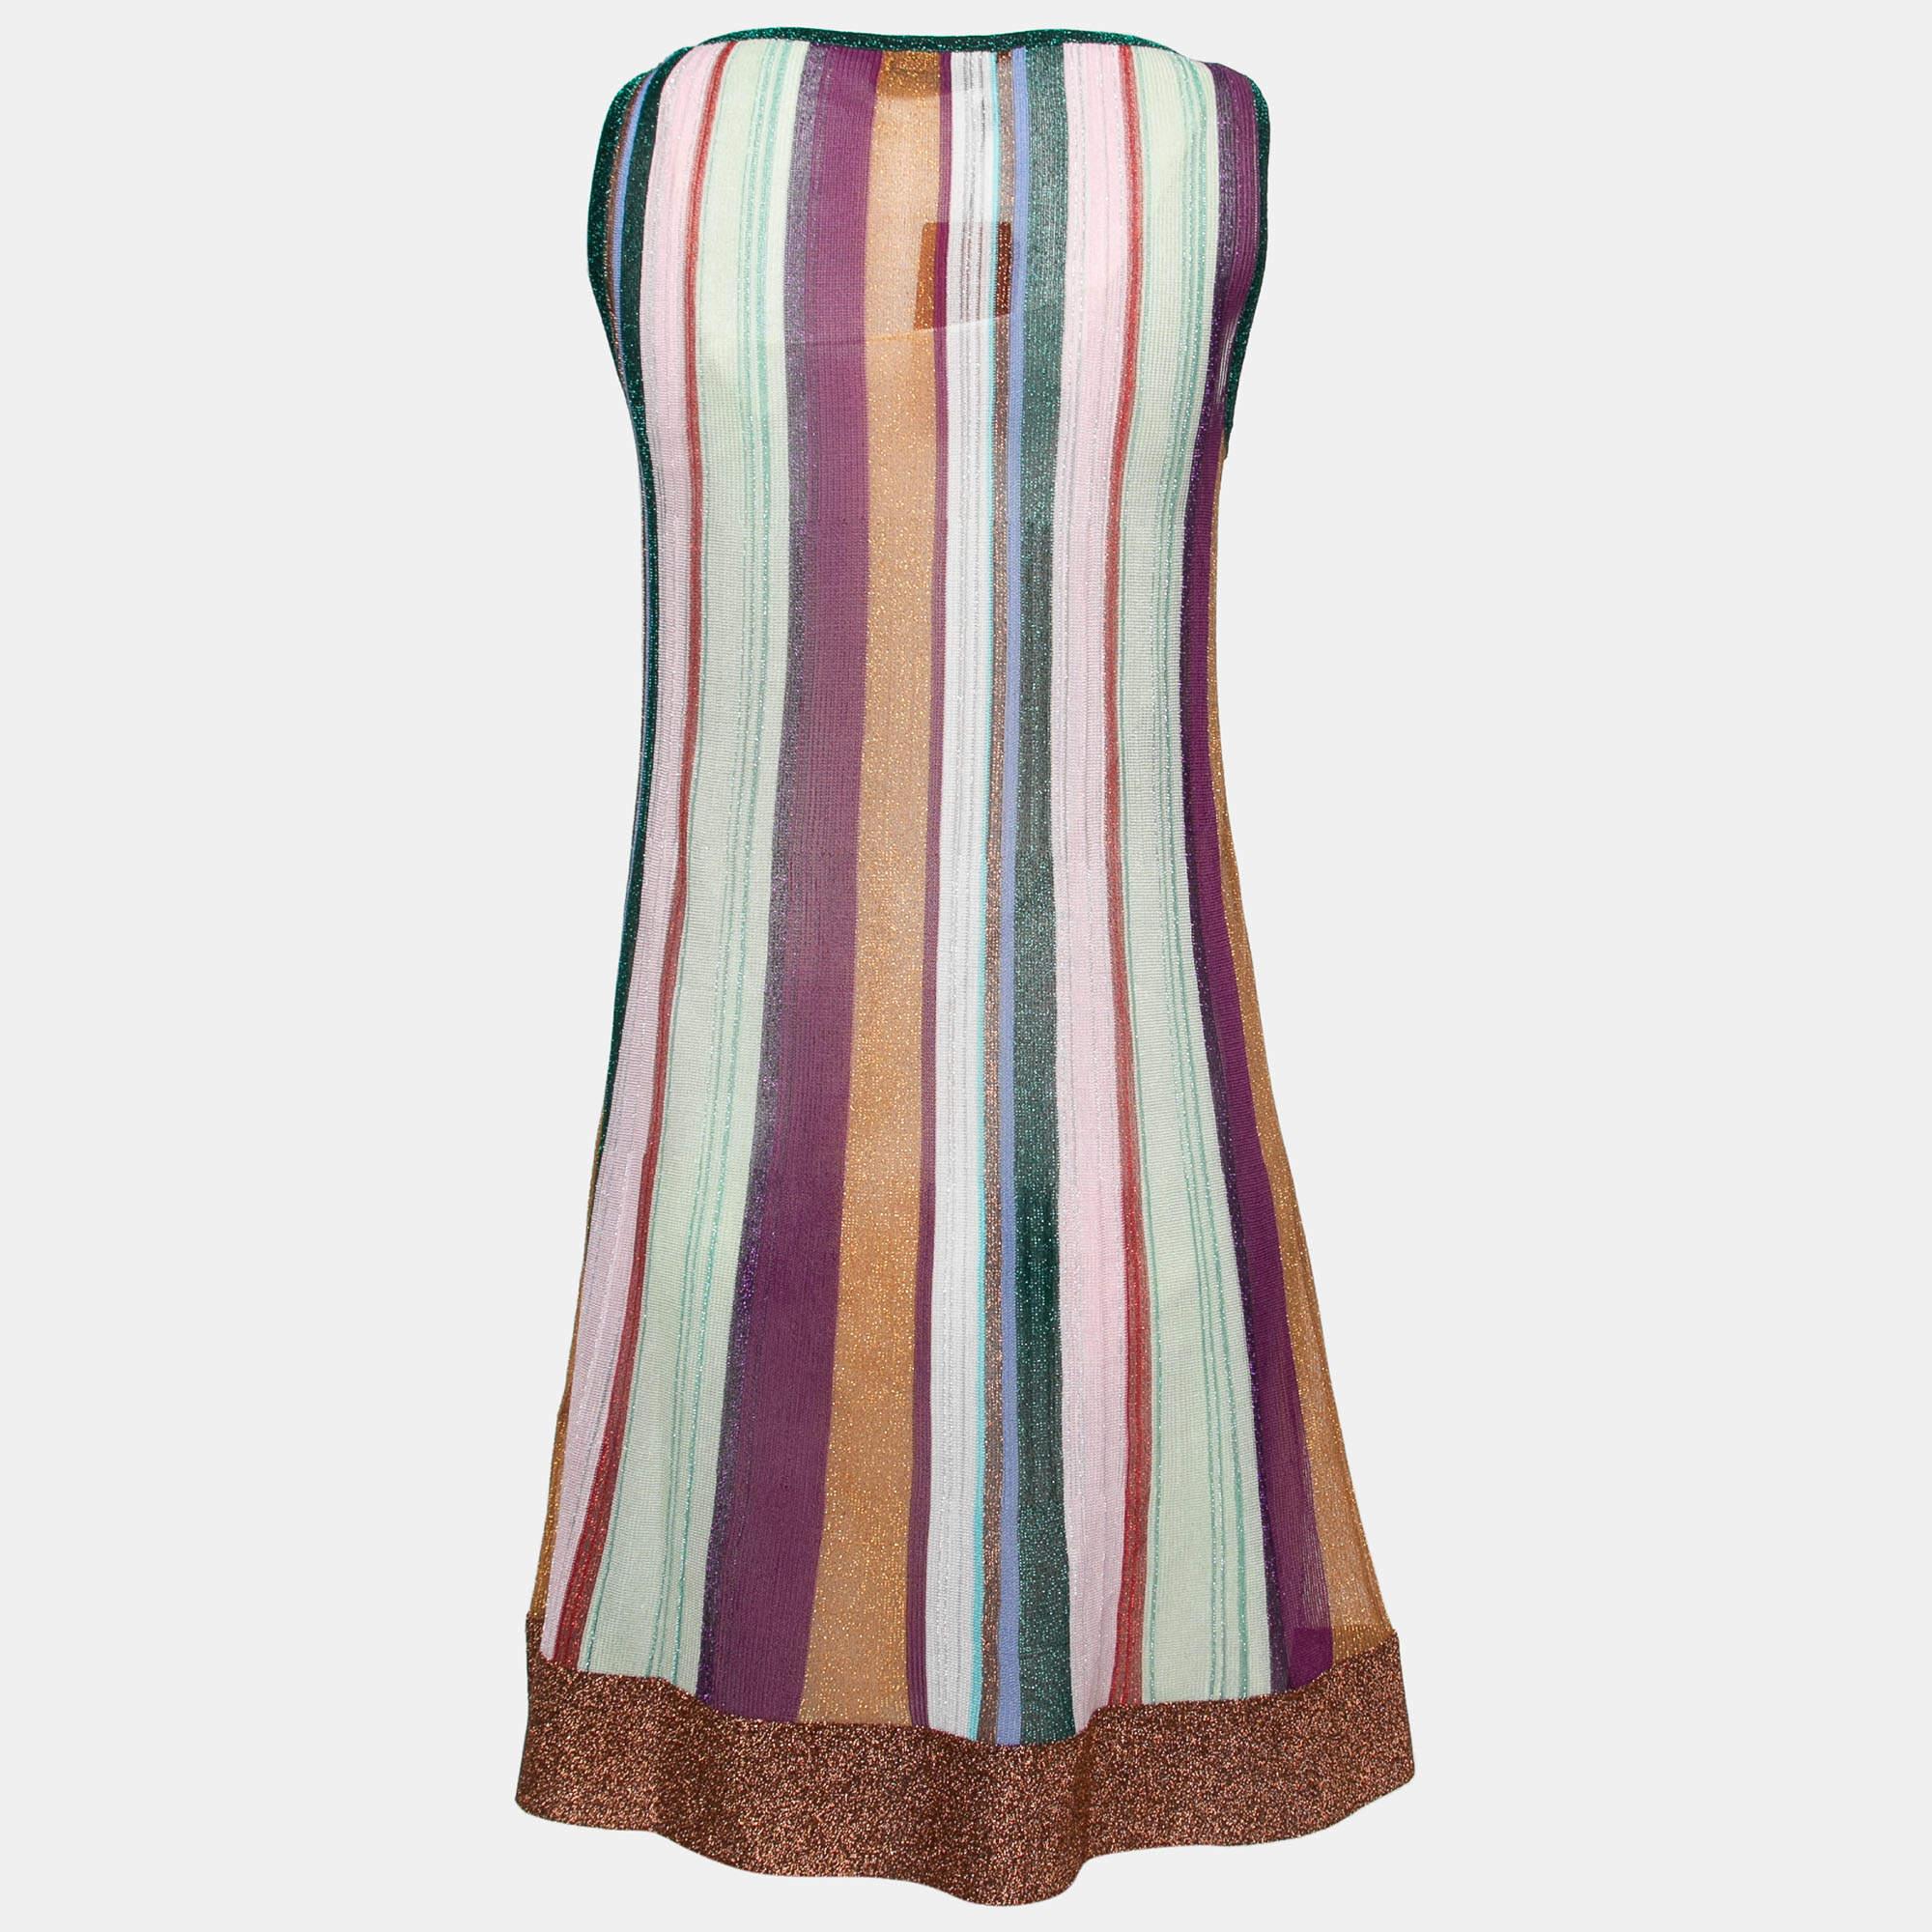 Refresh your summer wardrobe by adding this beautiful dress from Missoni. Creatively made and featuring a poised style, this dress will make you look absolutely elegant.

Includes: tag
